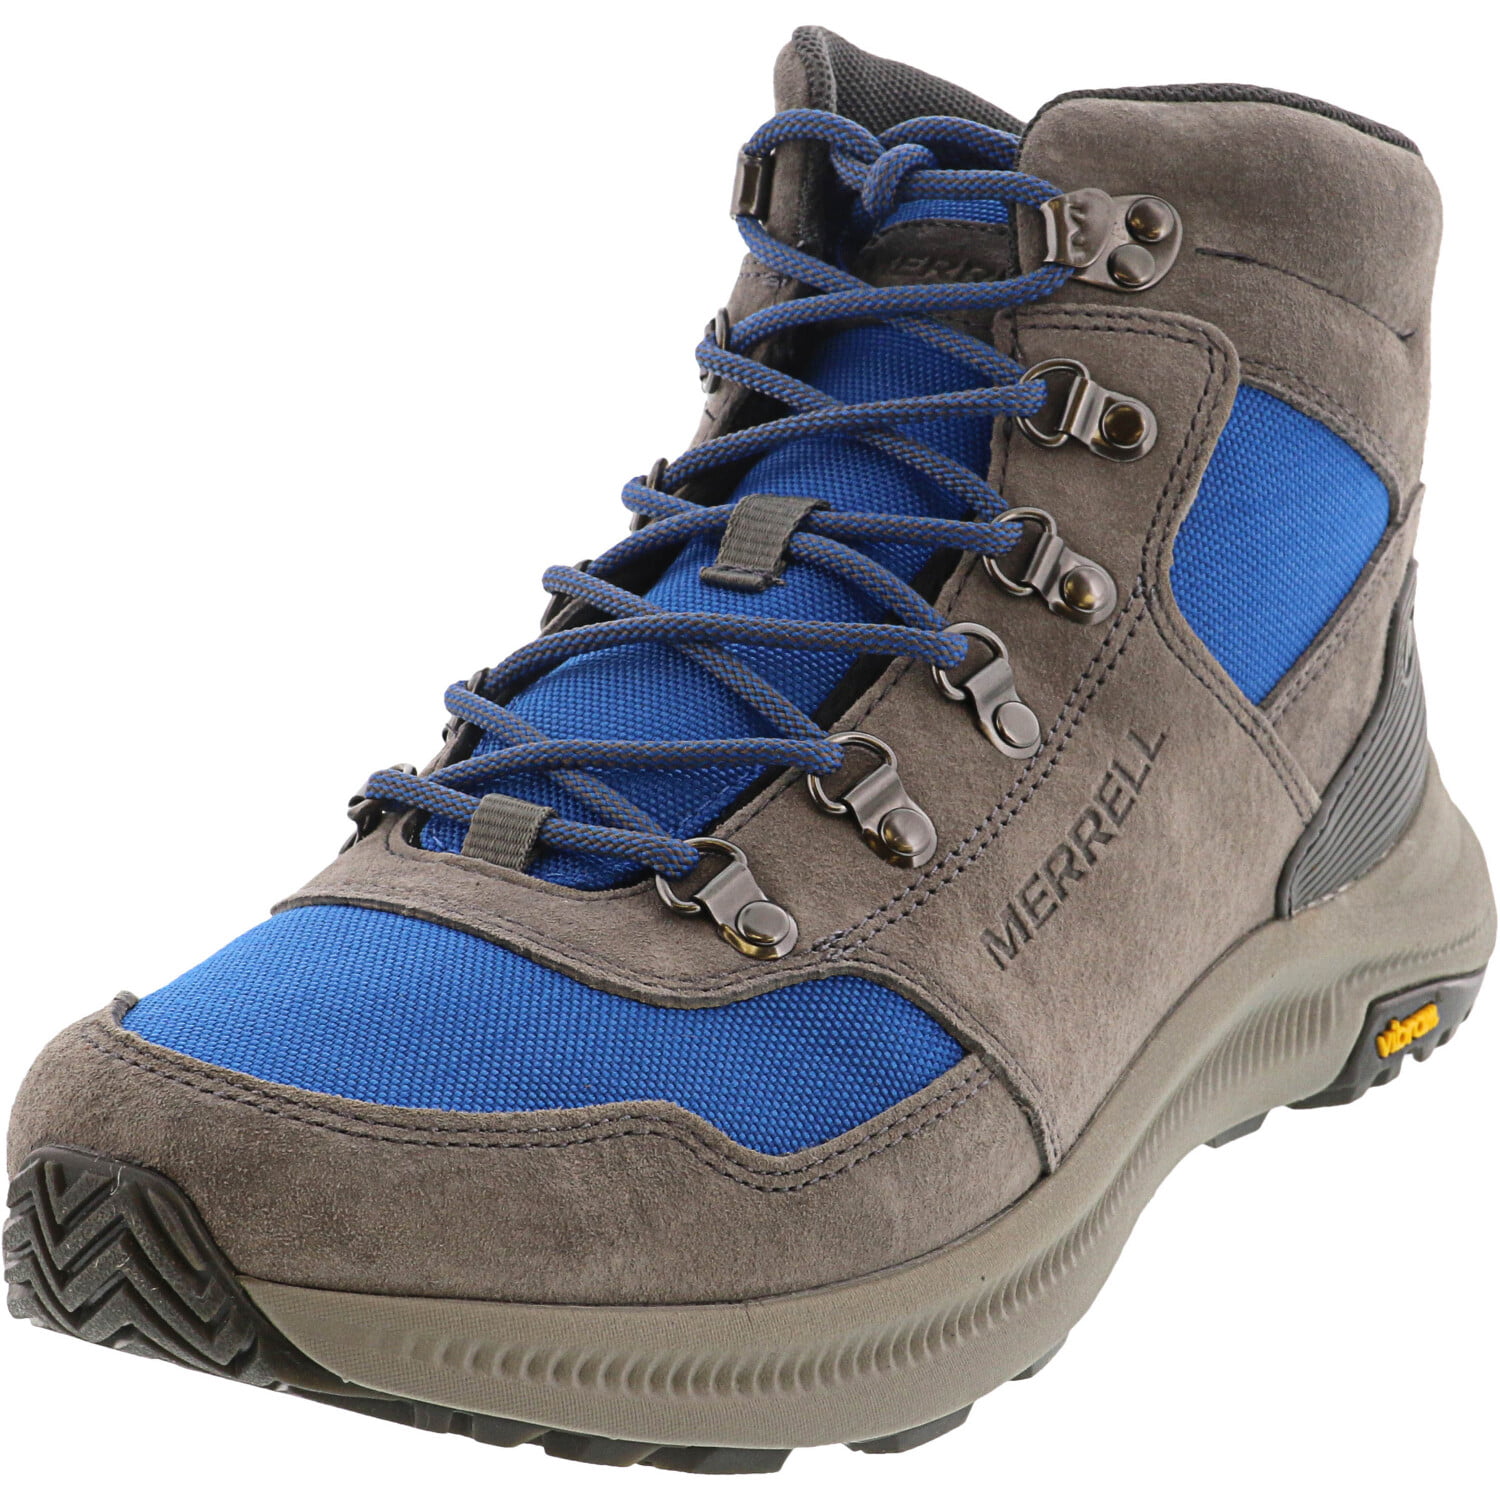 Merrell - Merrell Men's Ontario 85 Mid Imperial High-Top Leather Hiking ...